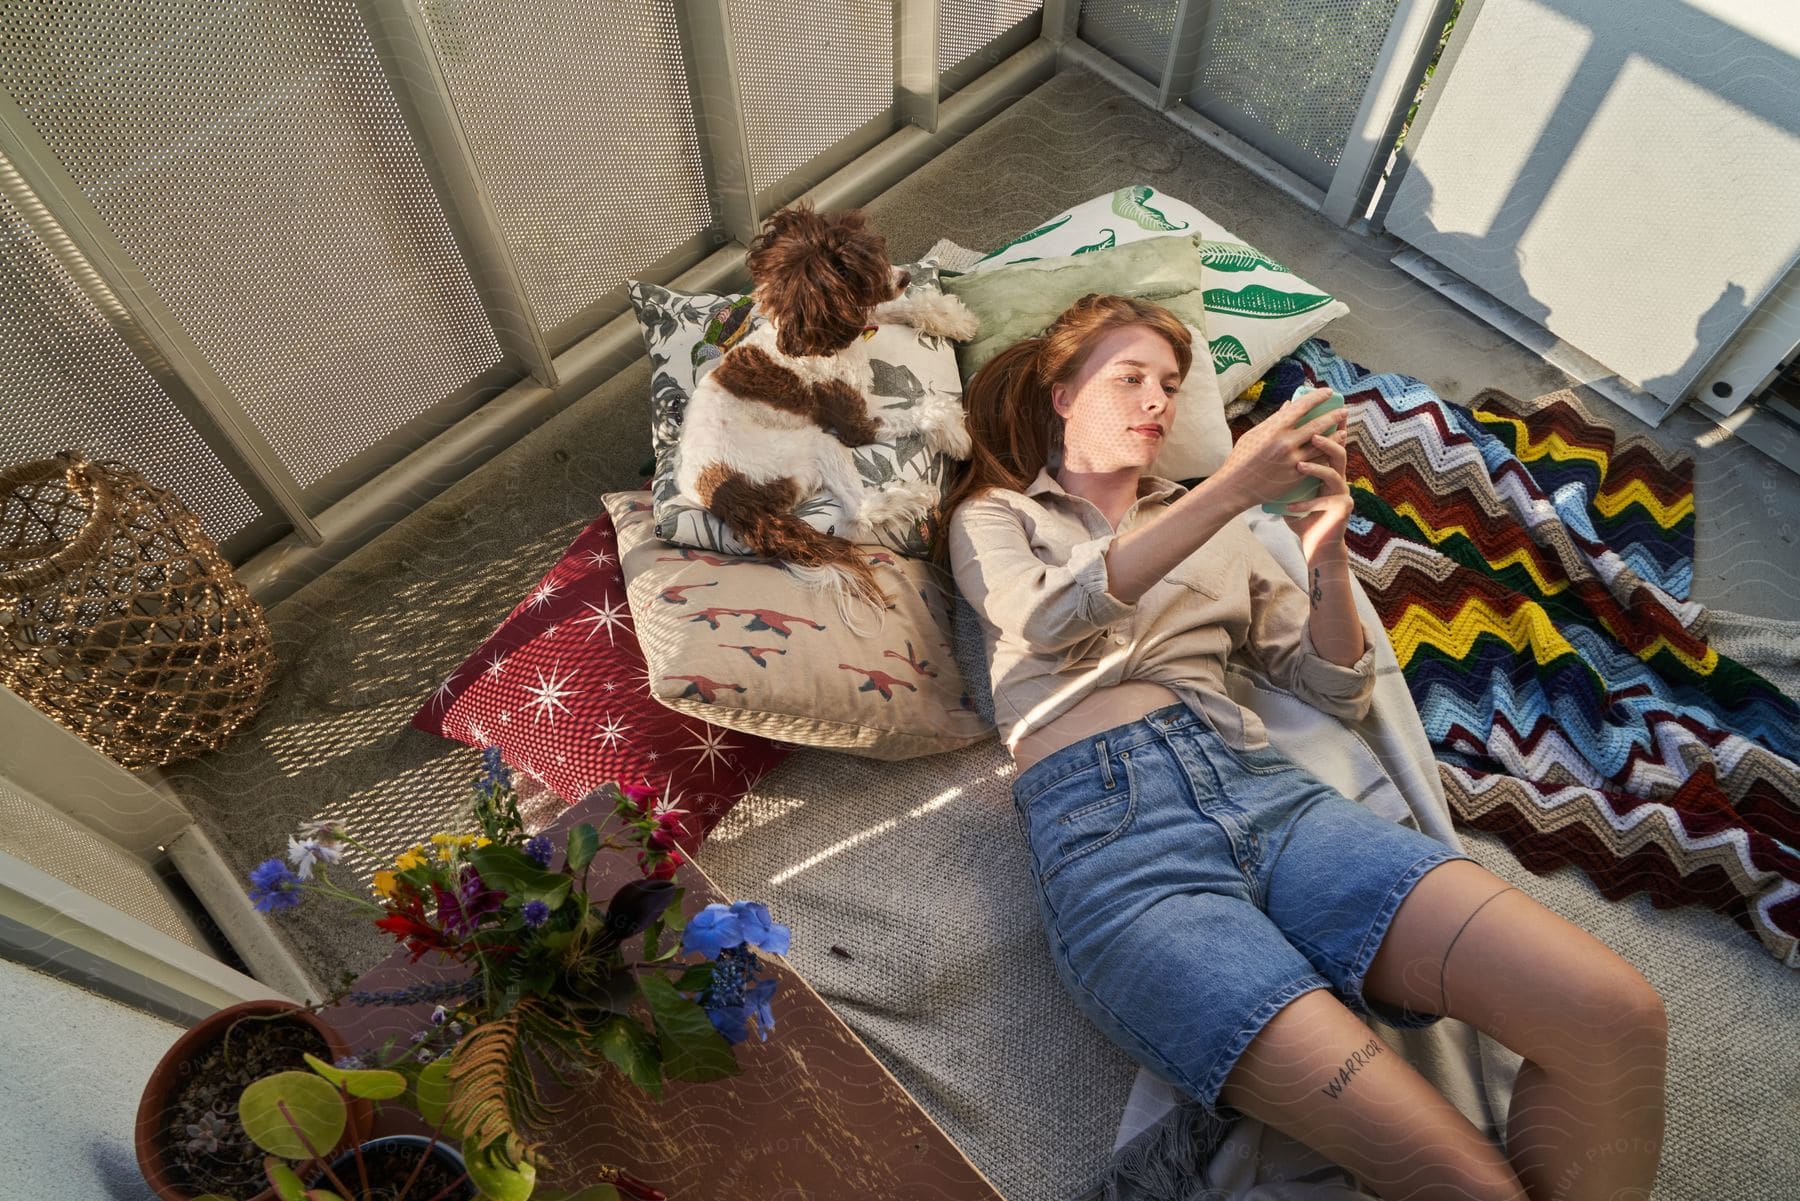 Woman lying on blankets and pillows, using her phone beside her dog.